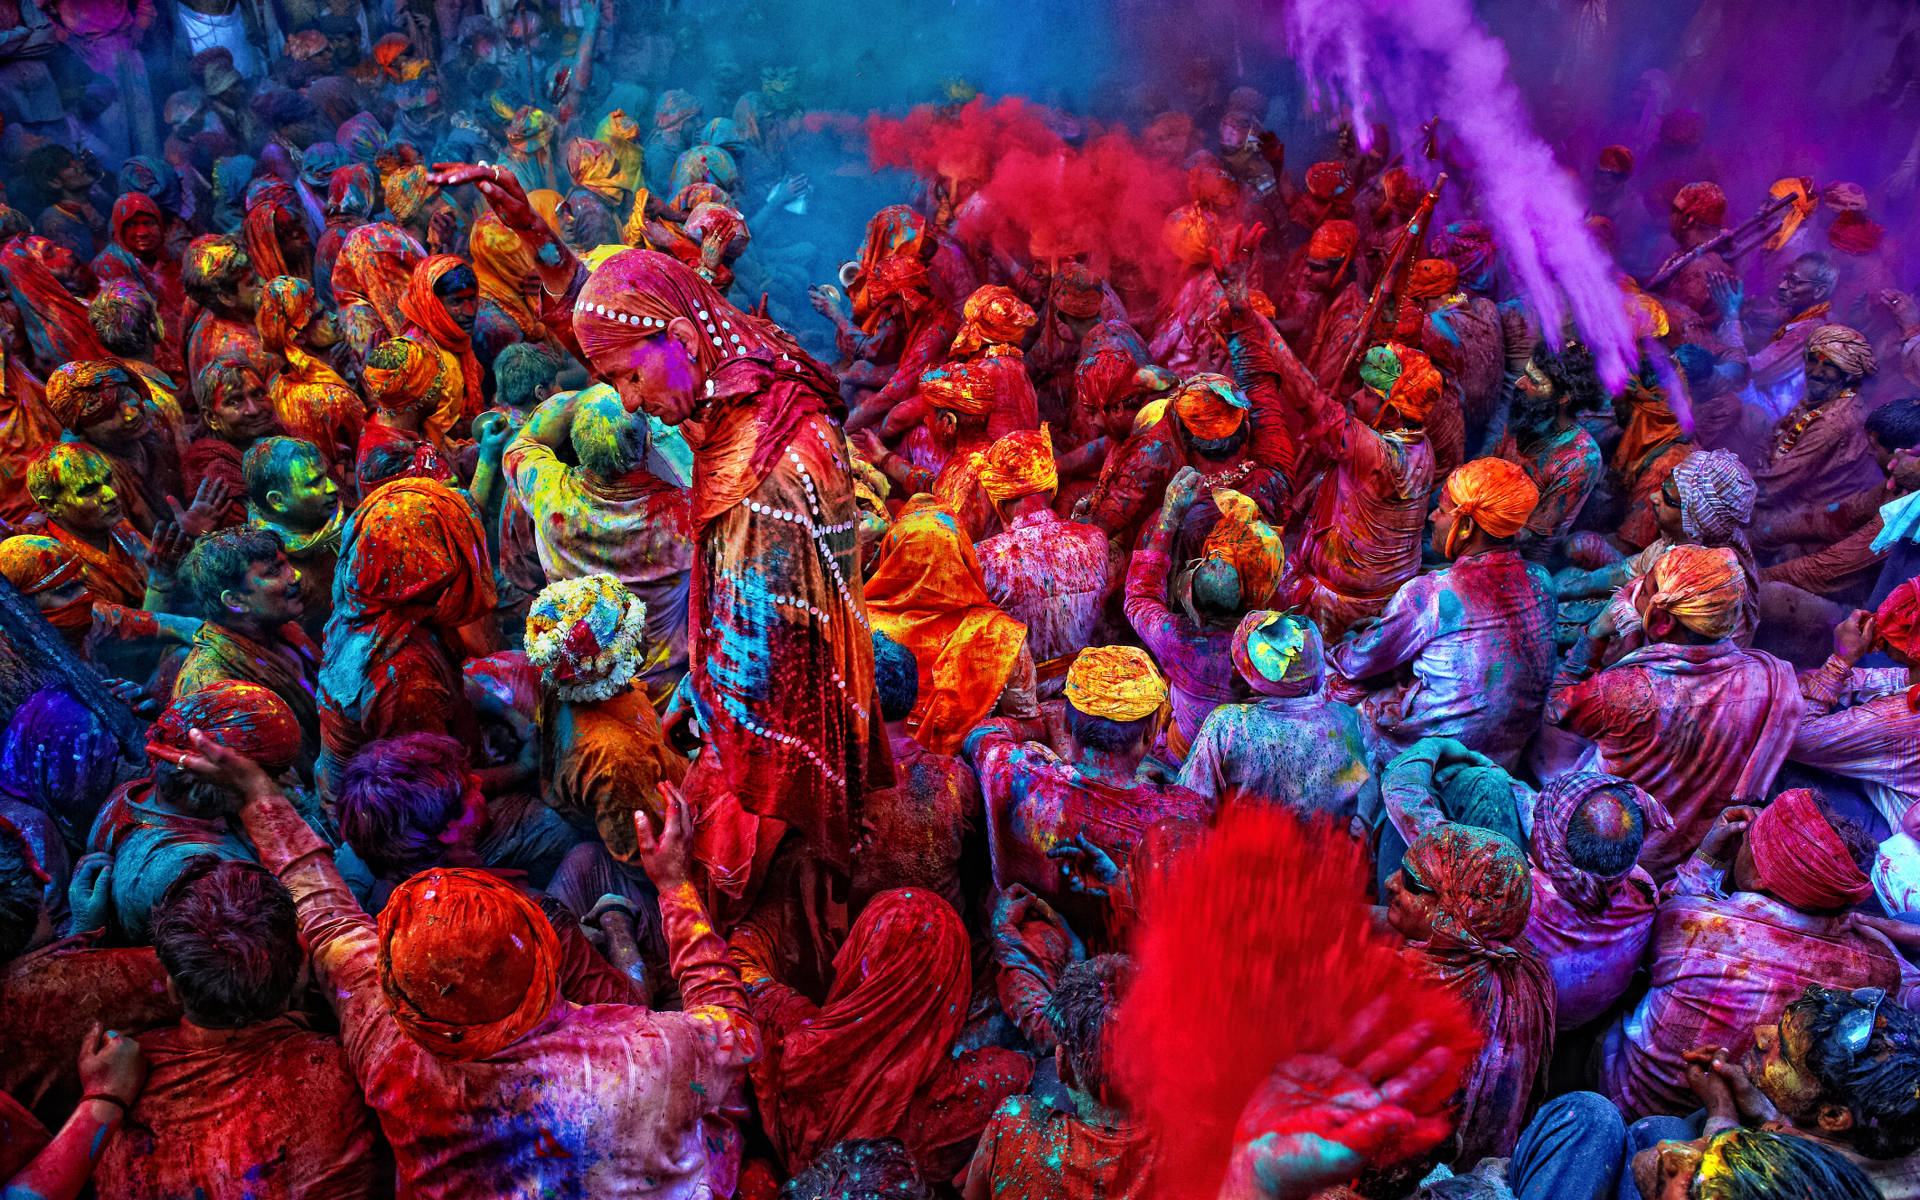 Celebrate Vibrancy And Joy With This Happy Holi Hd Image Depicting A Colorful Crowd.